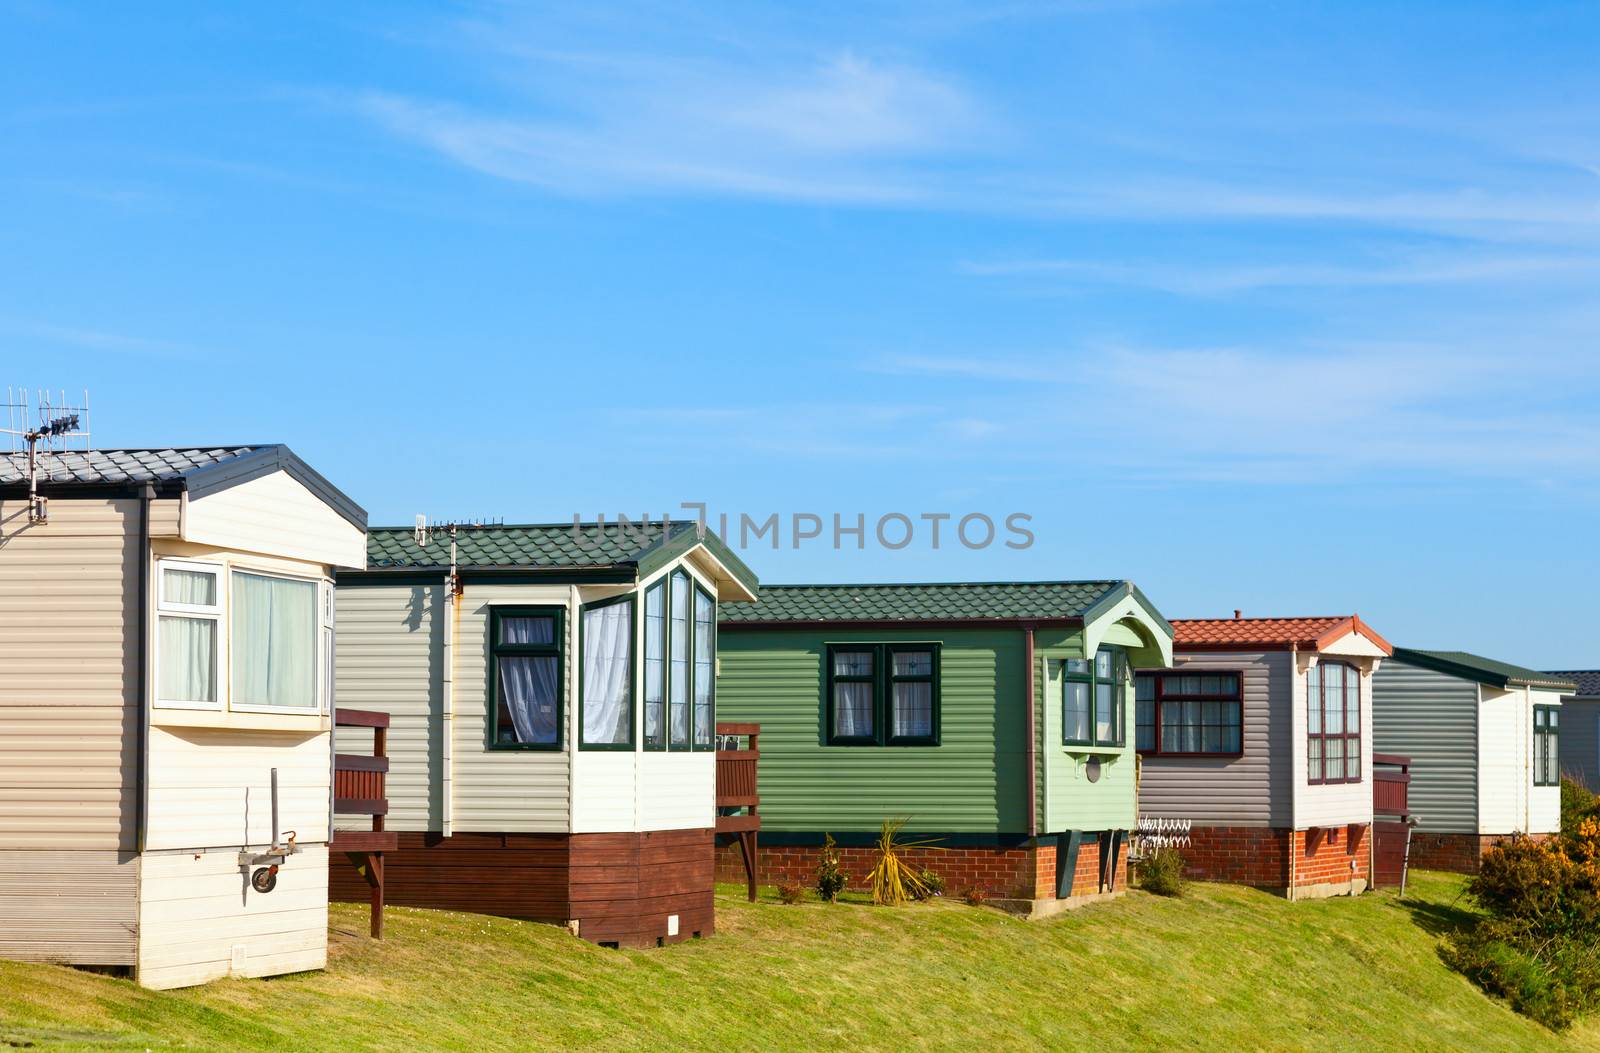 Holiday park cabins by naumoid